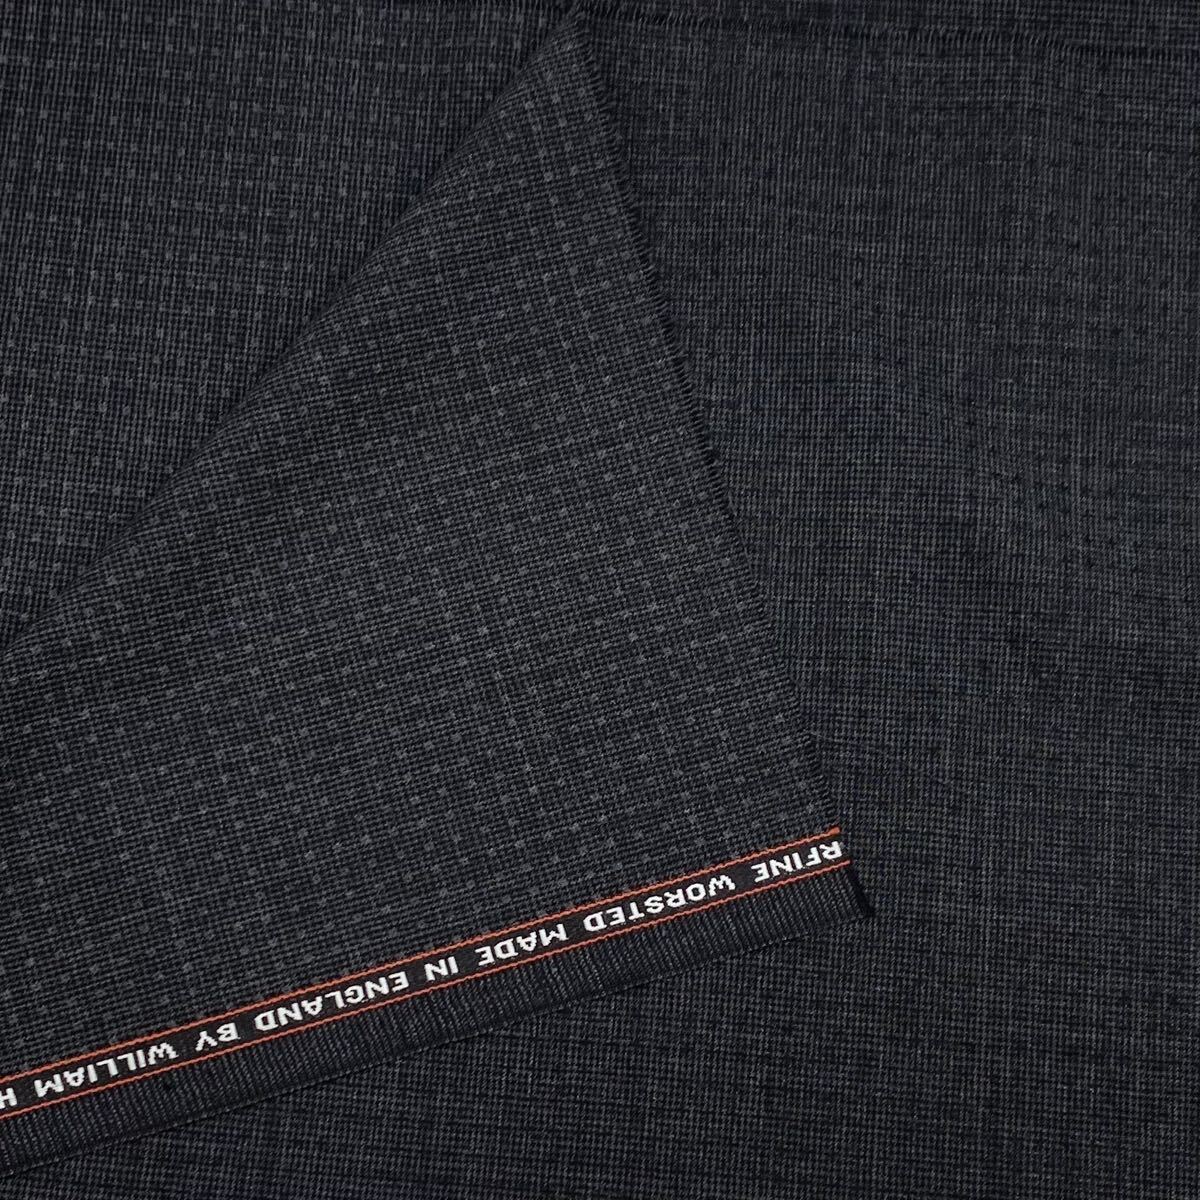 R121-3m SUPERFINE WORSTED MADE IN ENGLAND BY WILLIAM HALSTEAD_画像2